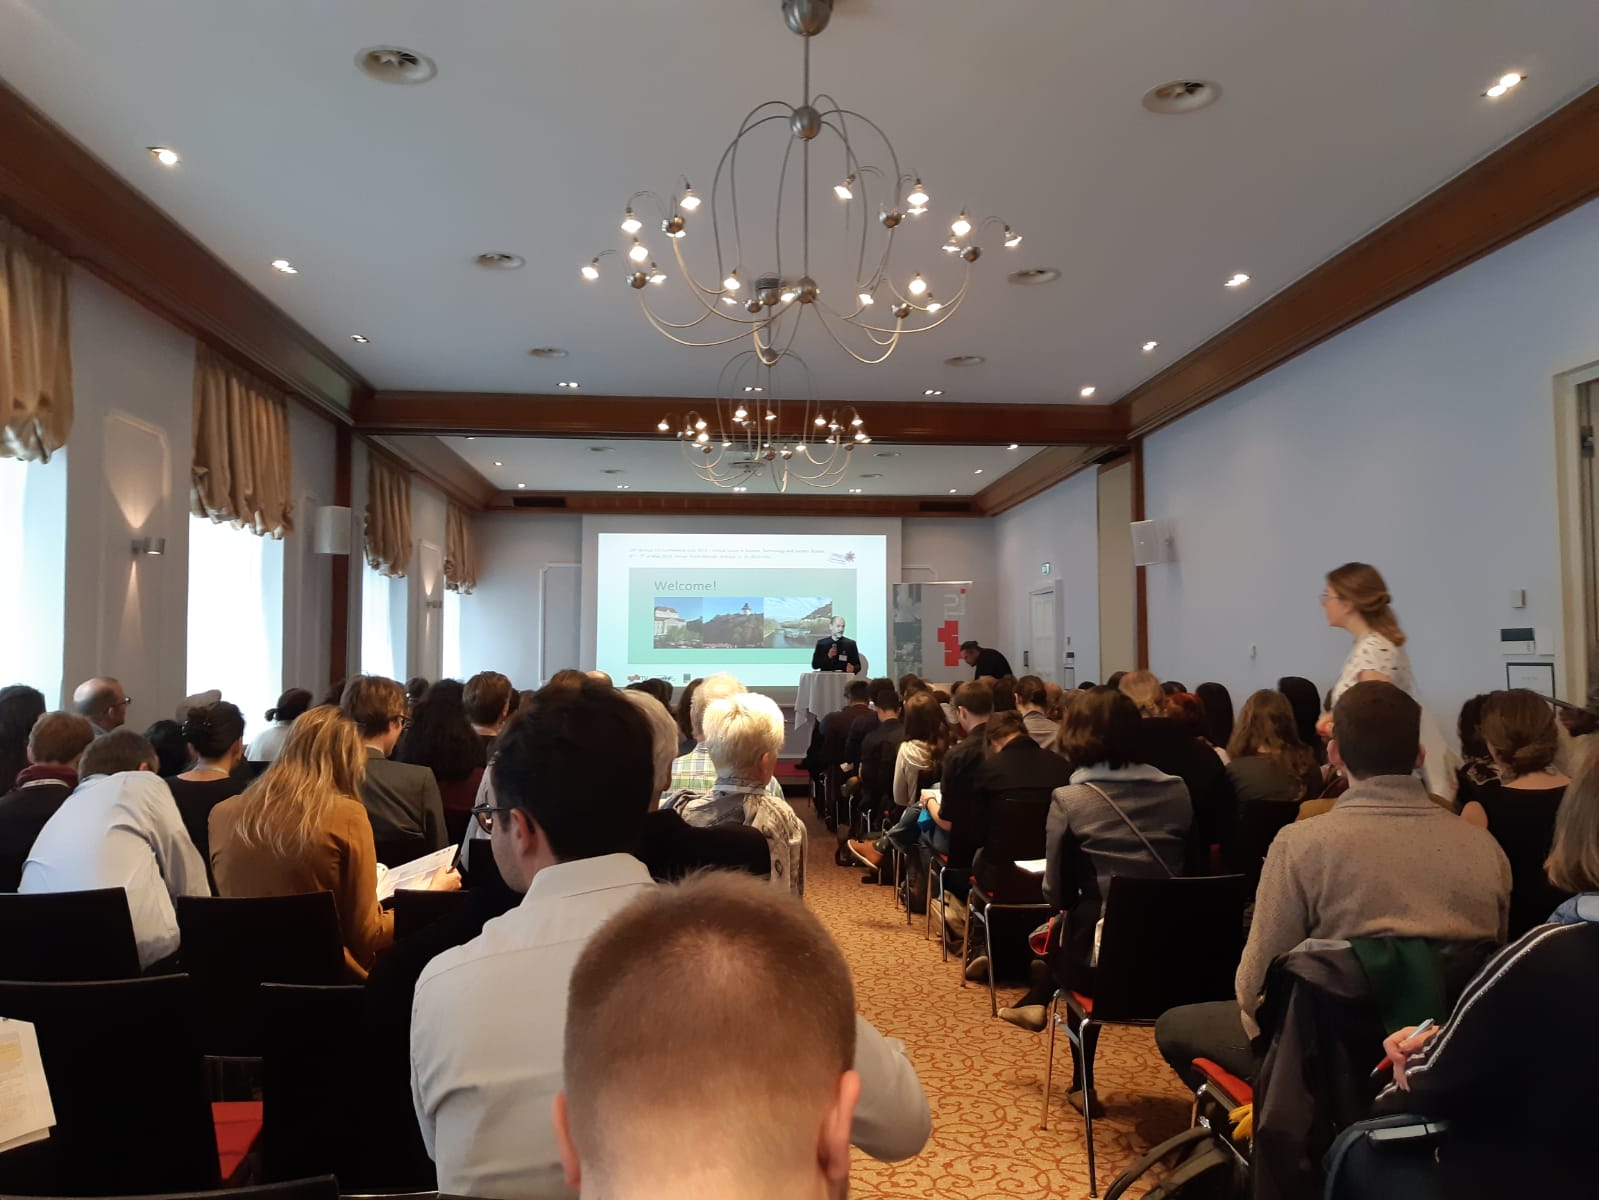 CLIC at the 18th Annual STS Conference Graz 2019